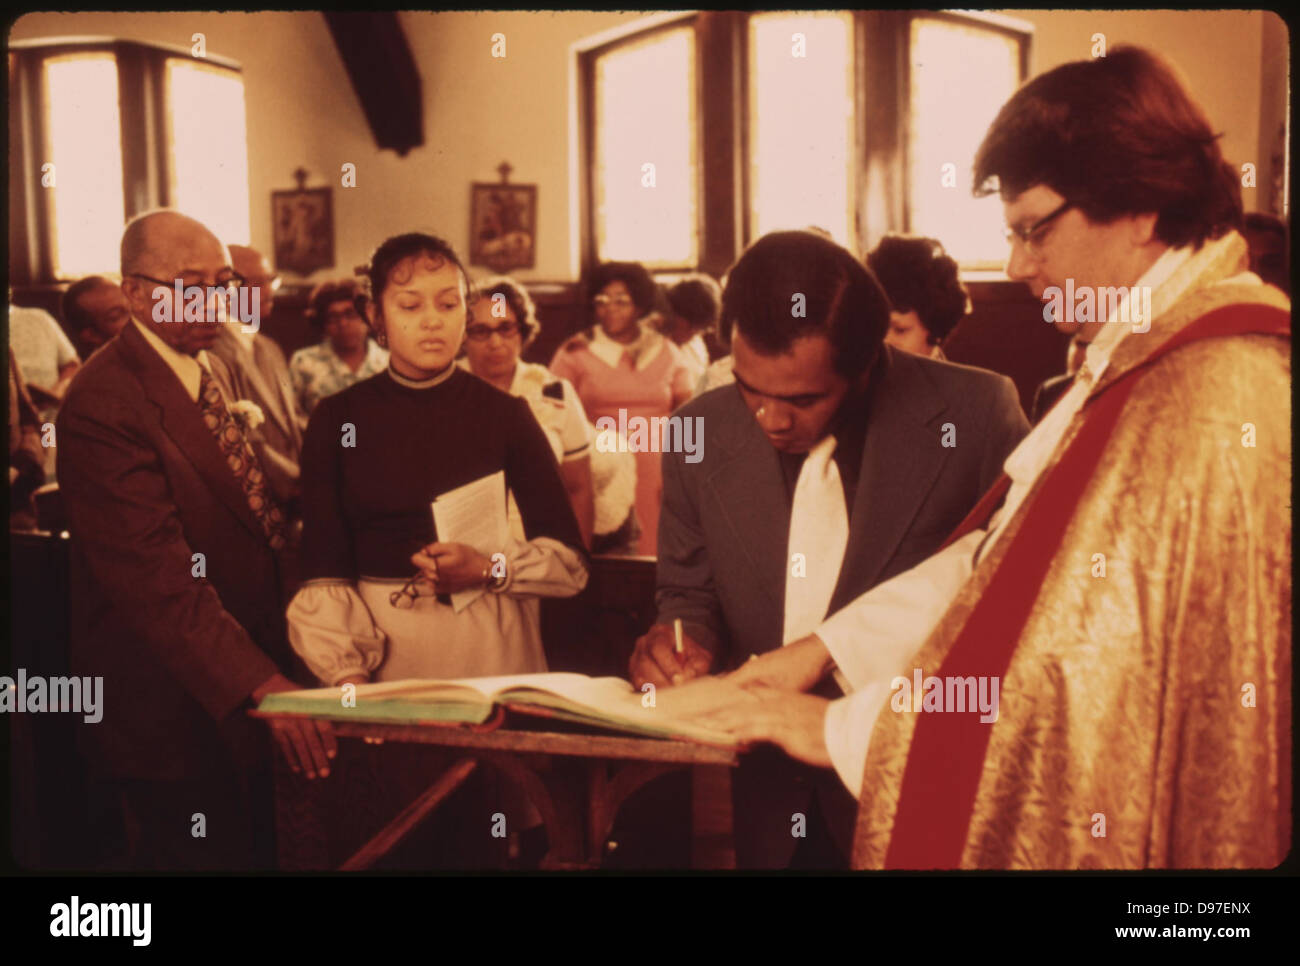 Black Family Signing The Church Registry At The Church Of The Messiah After The Baptism Of Babies In The Congregation. On The So Stock Photo